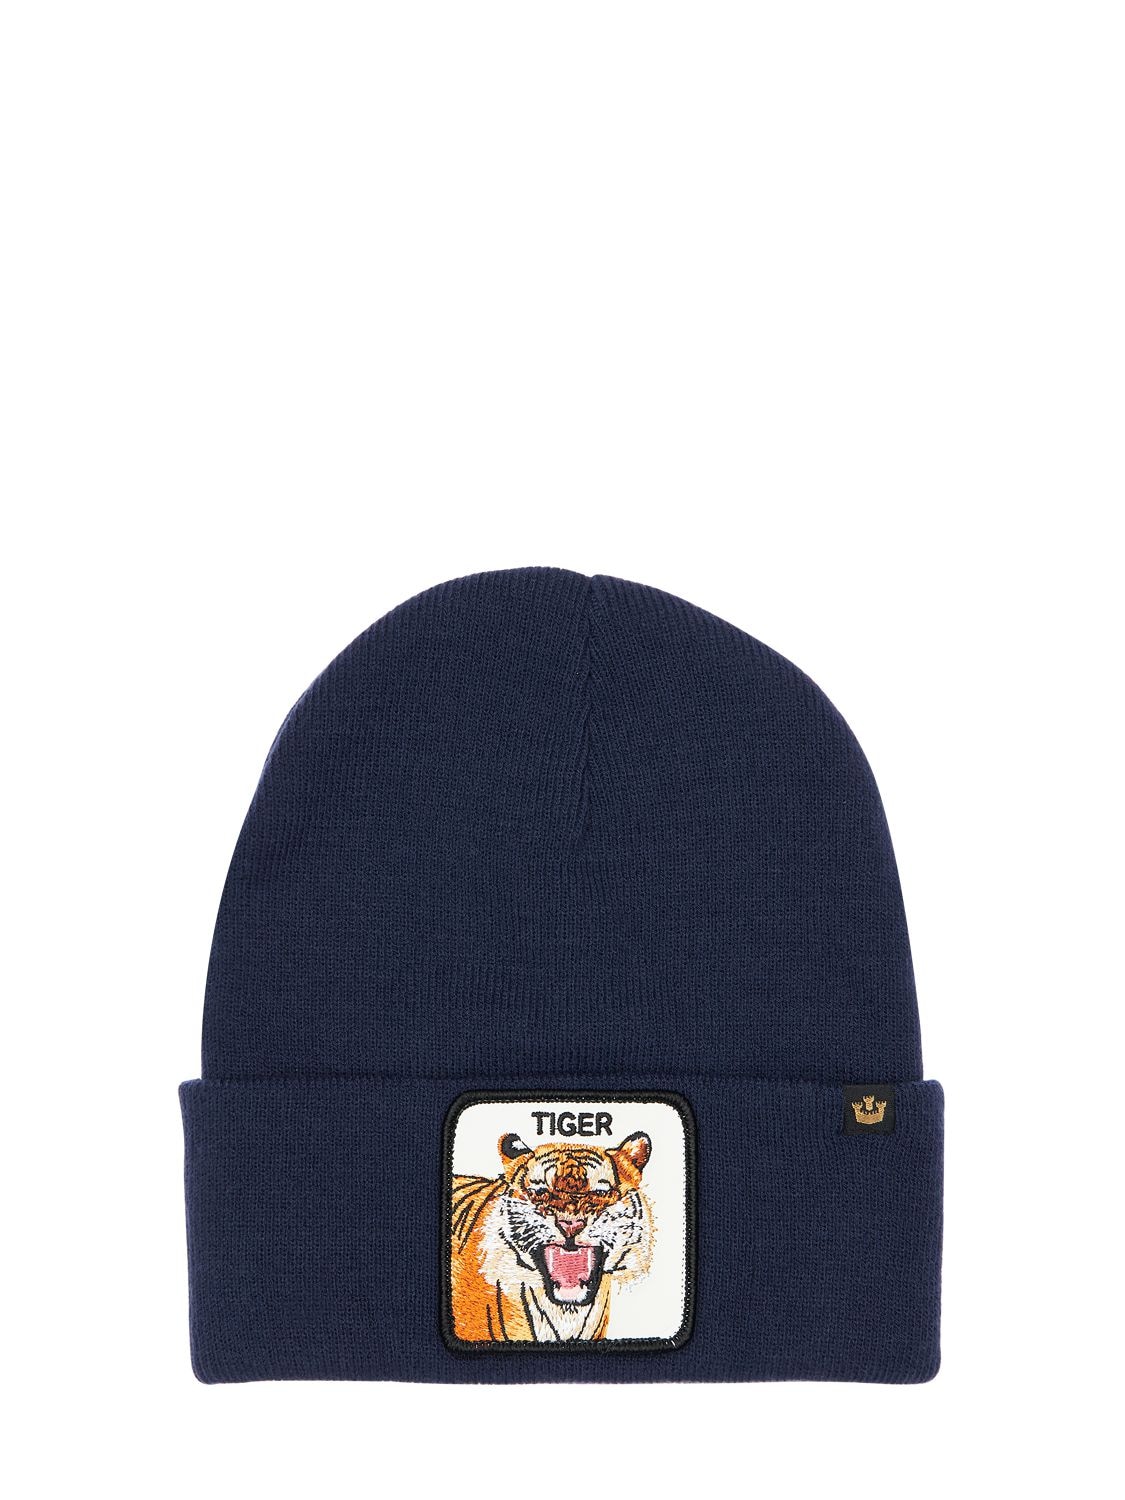 Goorin Bros Tiger Mouth Acrylic Knit Beanie In Navy